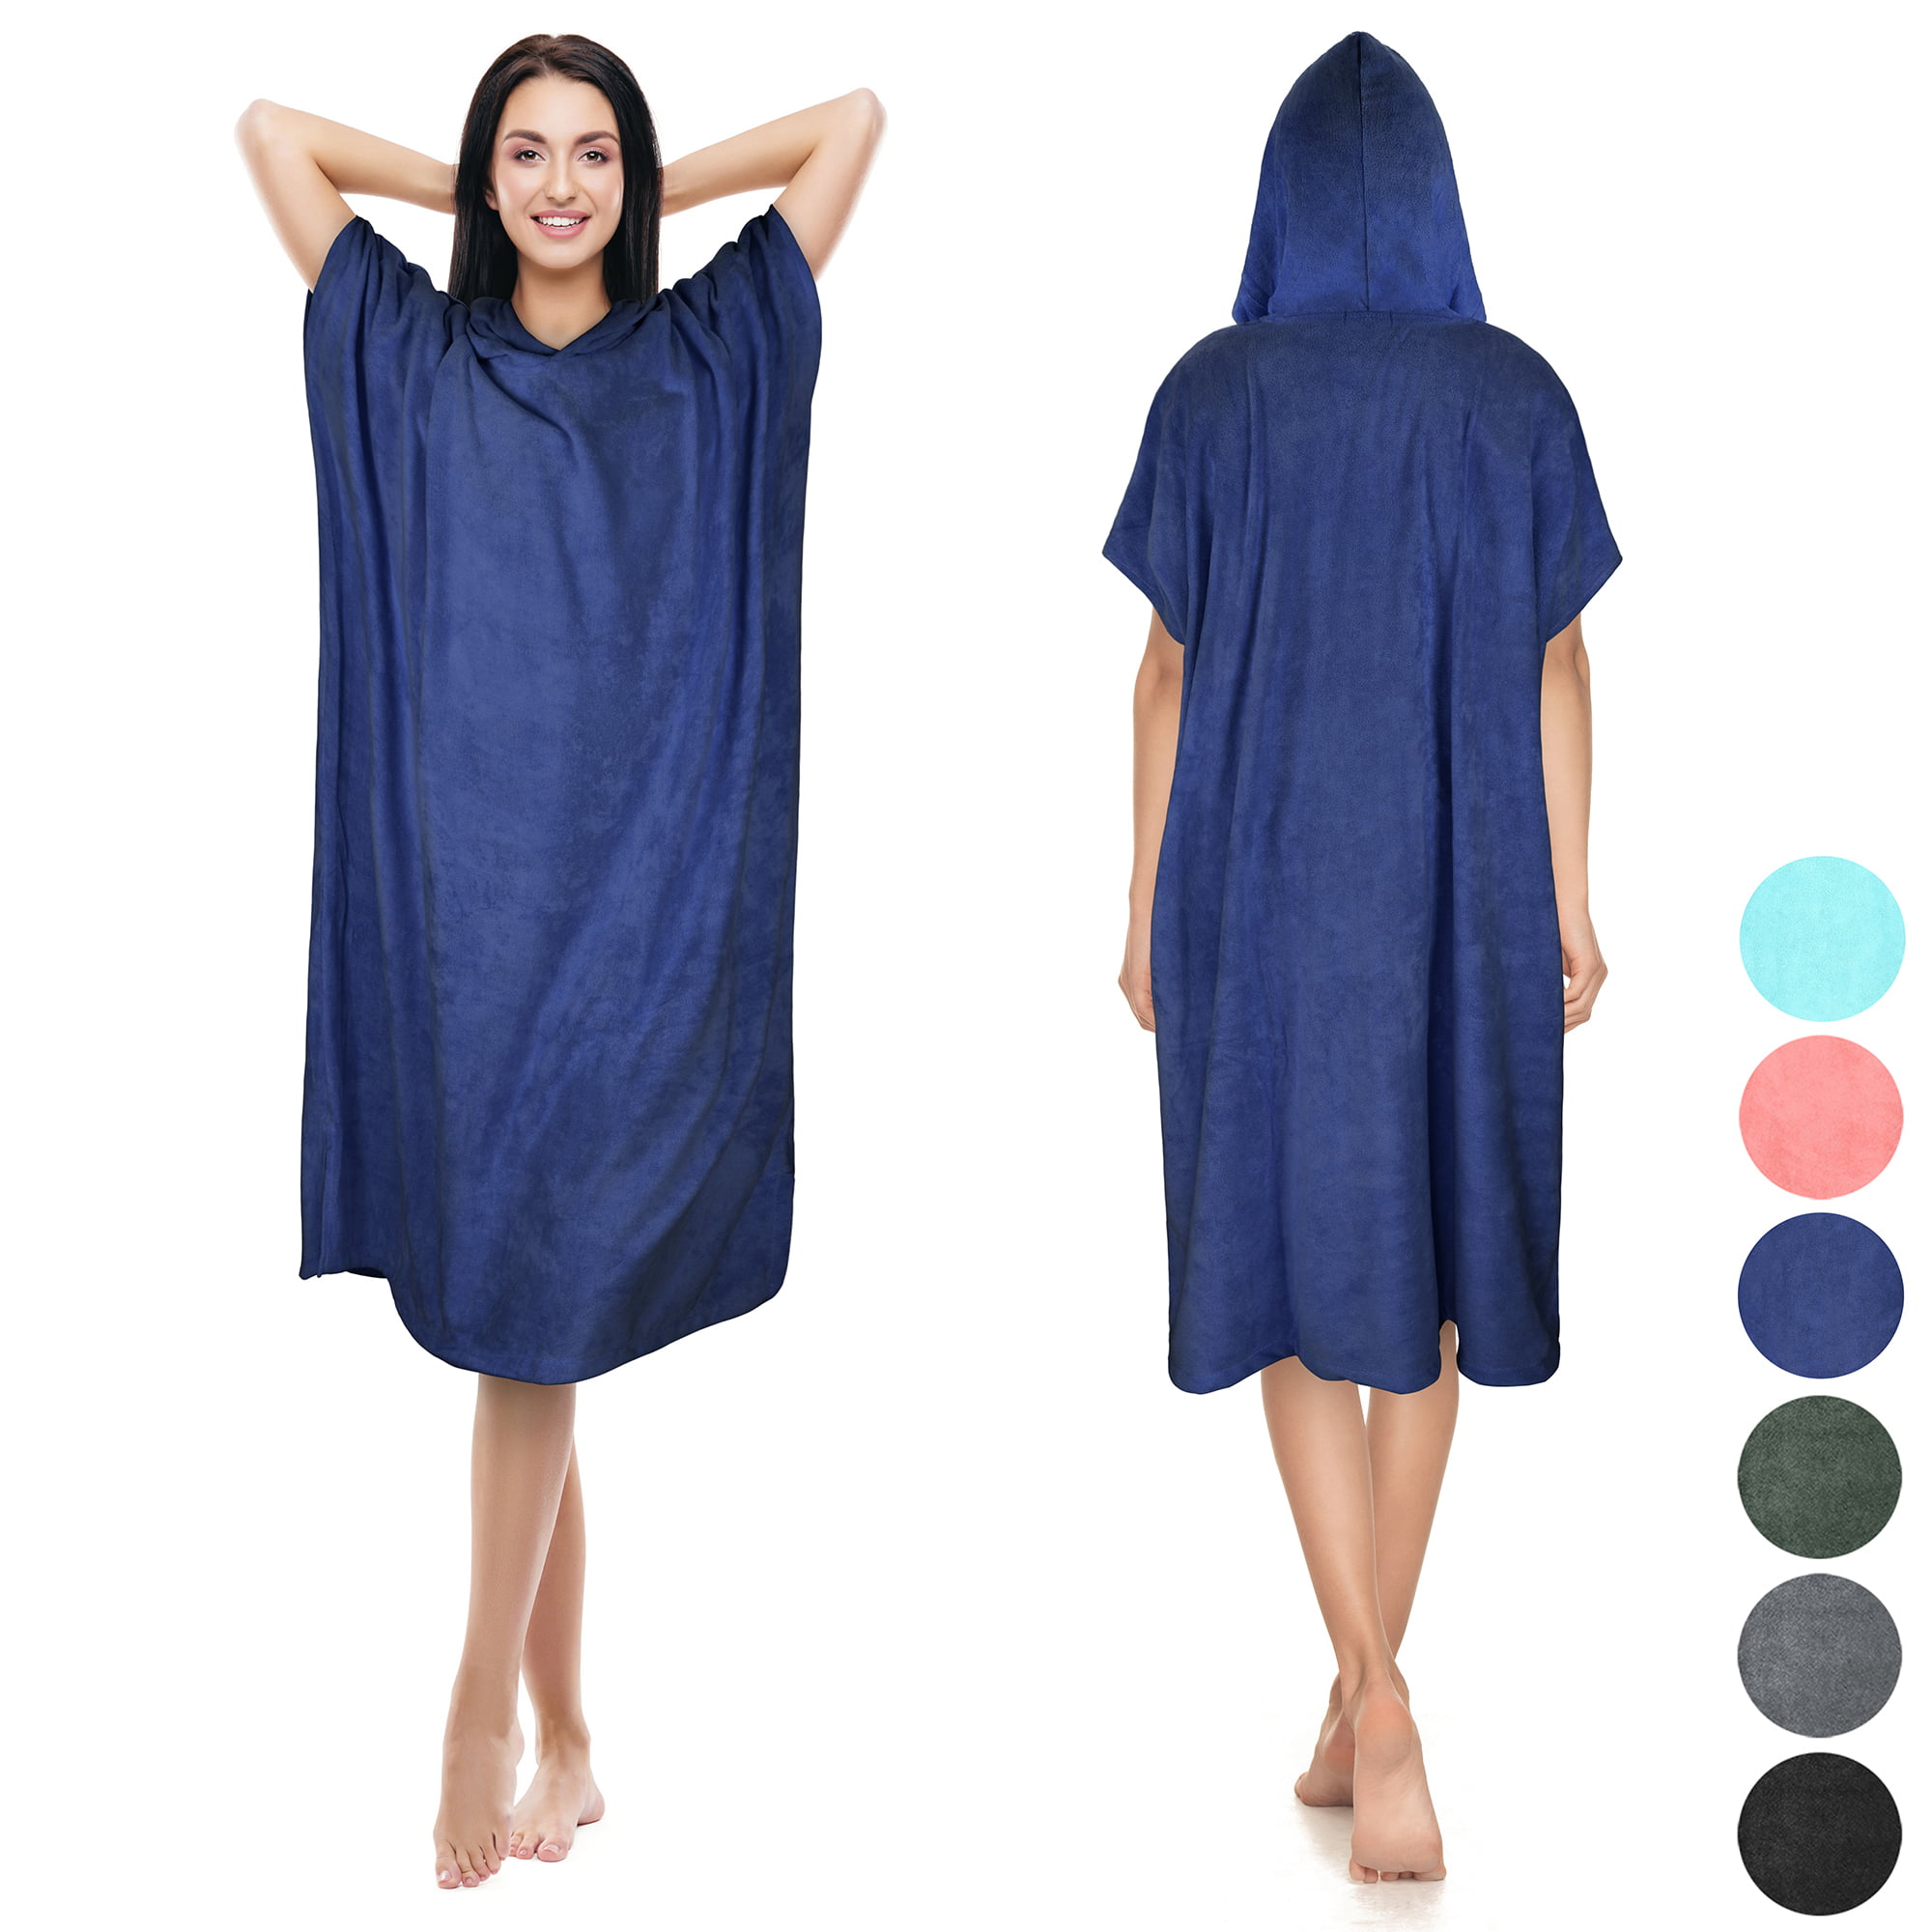 Adult Surf Beach Bath Hooded Poncho Wetsuit Robe Navy Blue 